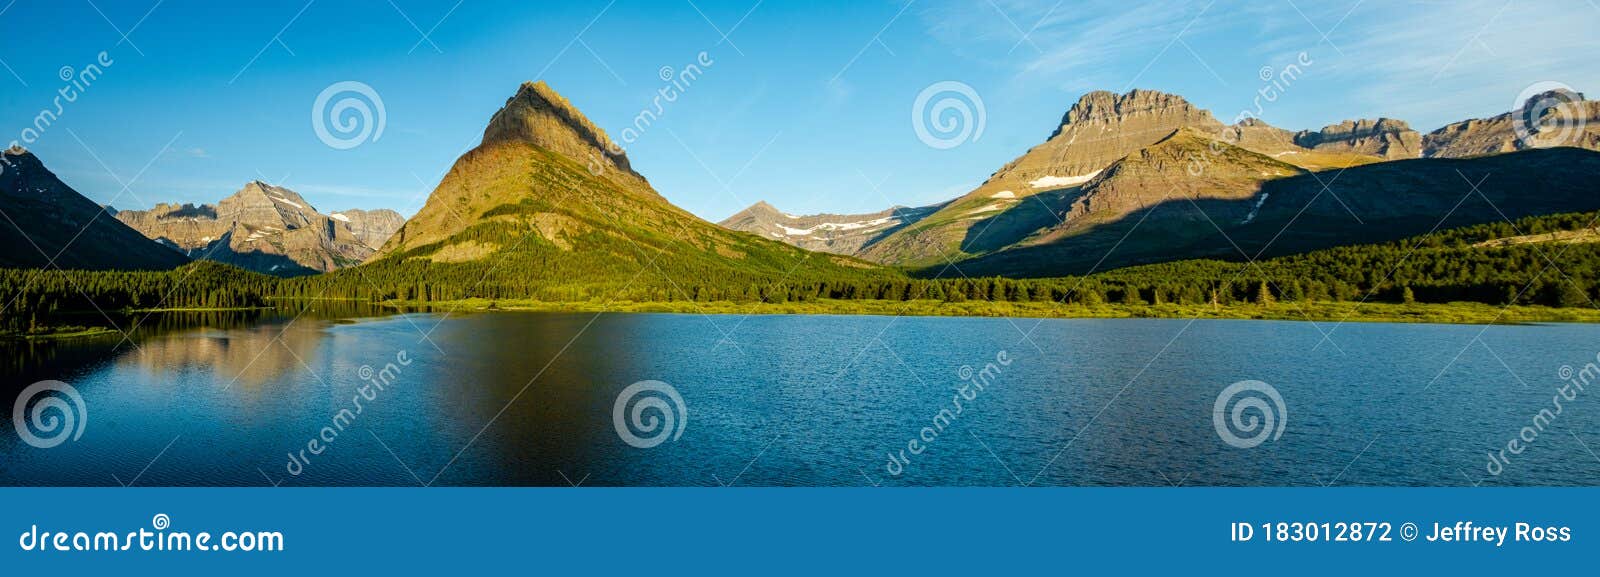 0000294_panorama of swiftcurrent lake, mount gould and mount wilbur - glacier national park, montana 2573